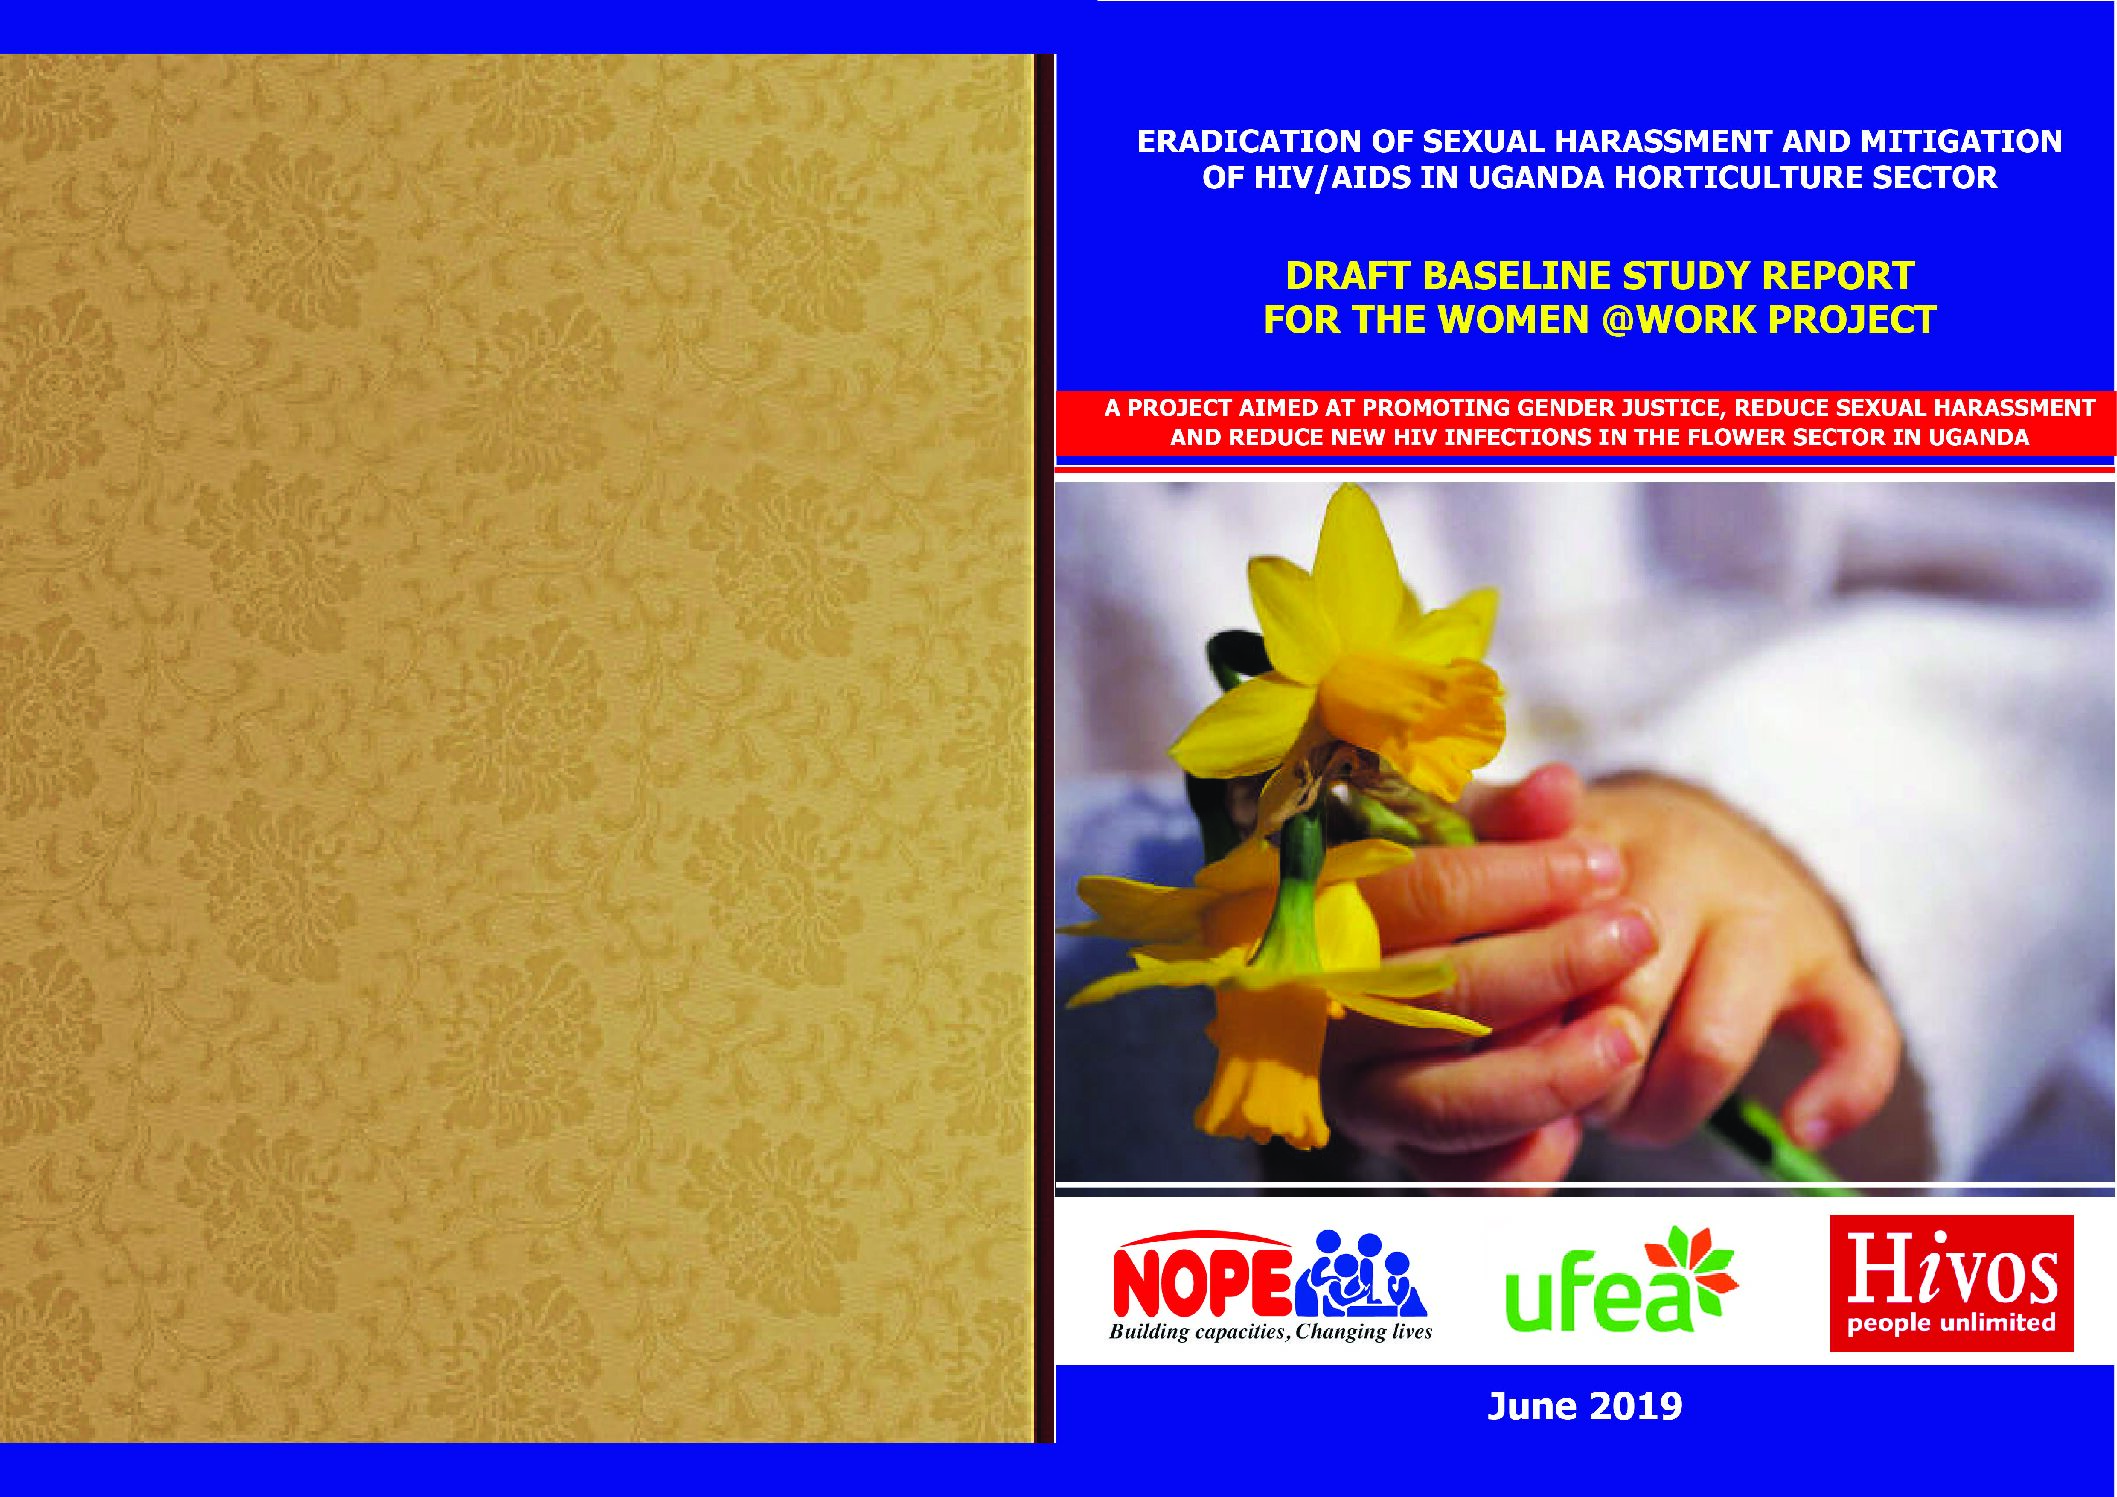 Eradication of sexual harassment and mitigation of HIV/AIDS in Uganda horticulture sector